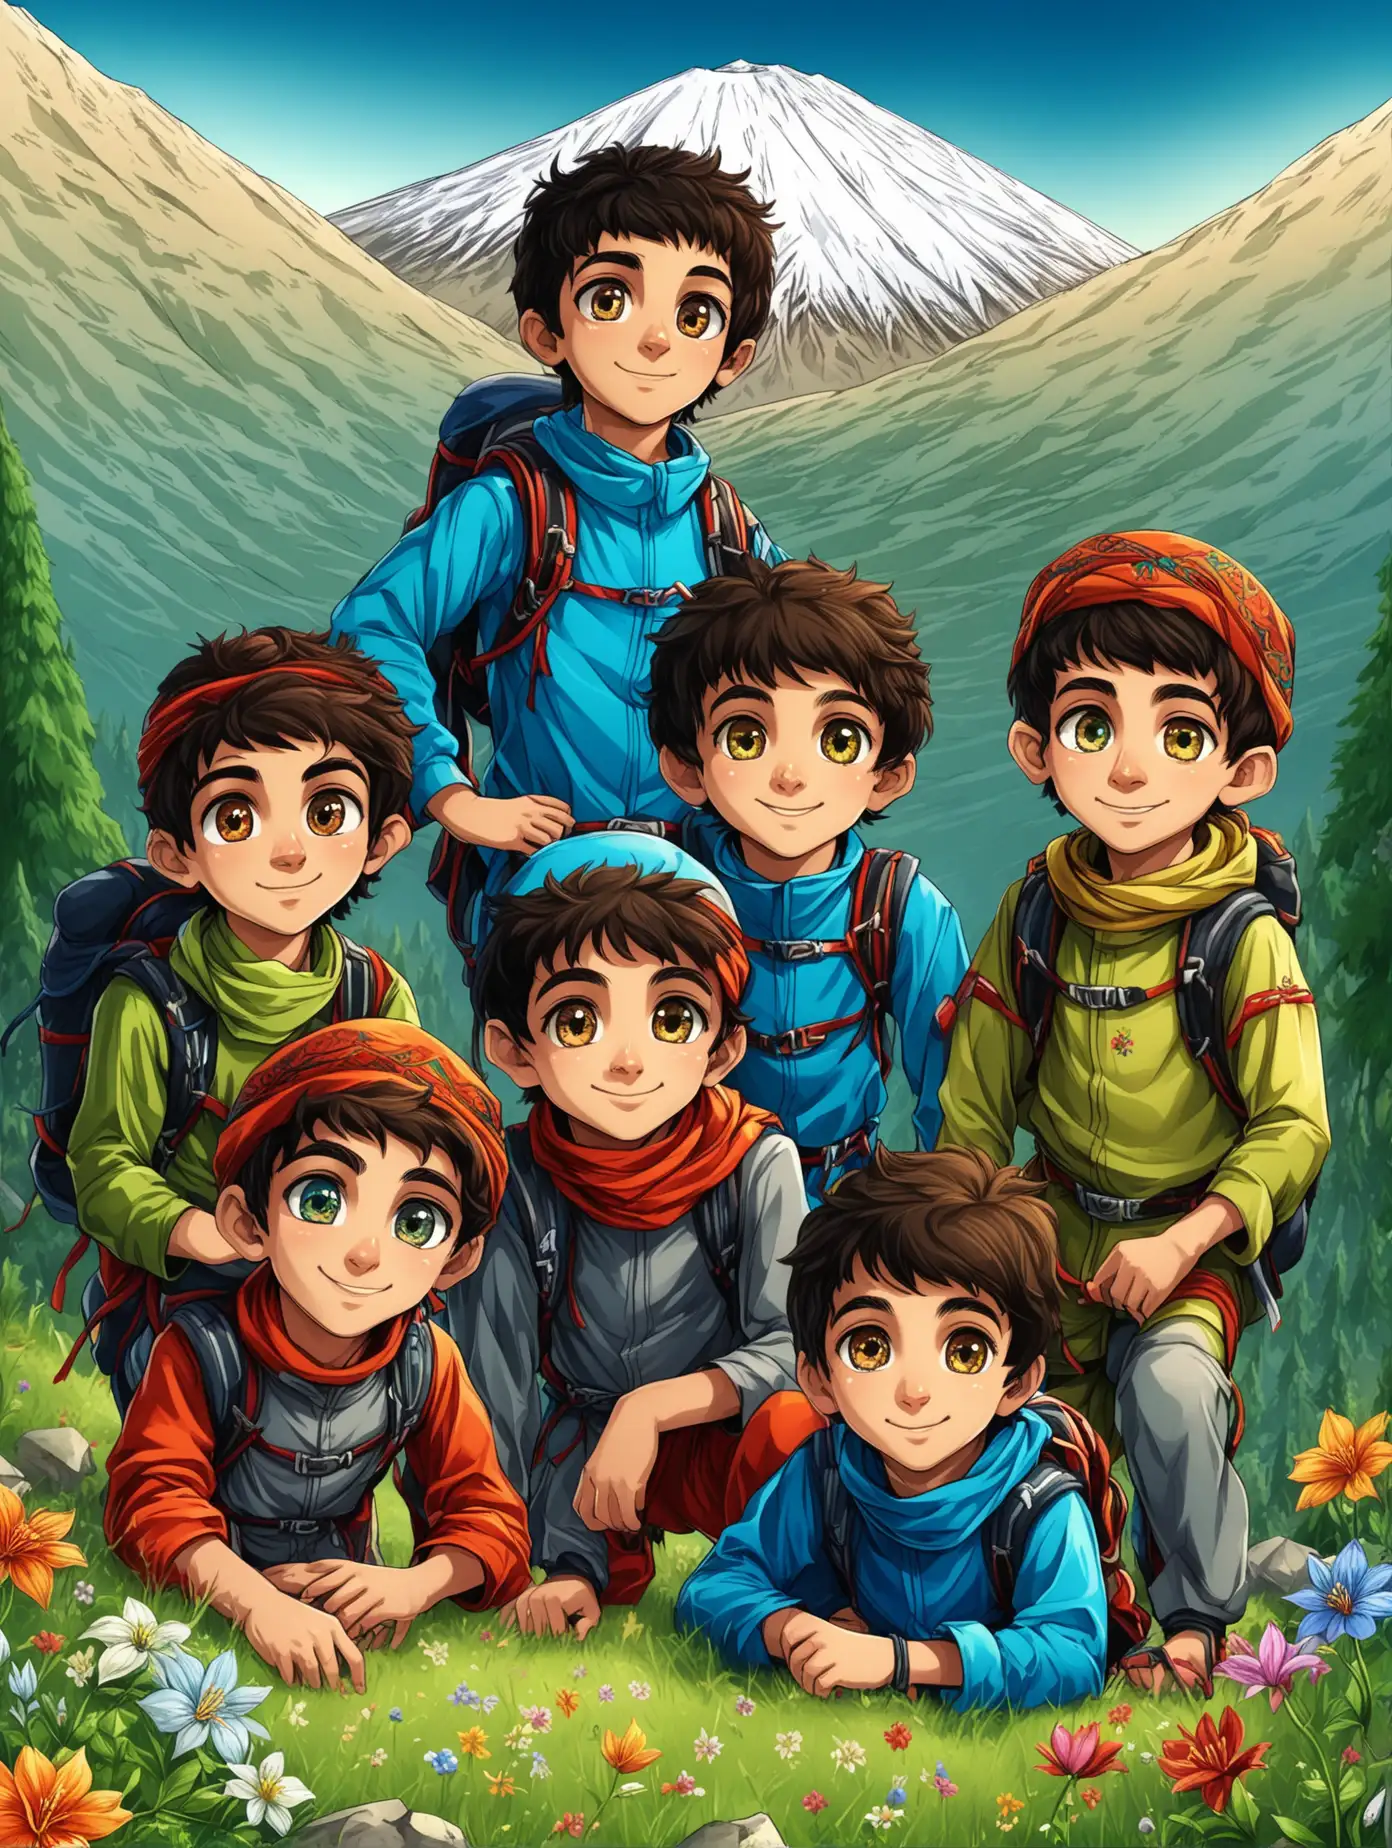 Defaults: Persian(face, language, design), beautiful.

Atmosphere is Damavand mountain, forest, flowers, grass, jungle.

Ali is a Persian 10 years old athlete boy, mountaineering, clothes full of Persian designs, cute, smaller eyes, bigger nose, white skin, smiling.

Taha is a team with 5 members of athlete boys, they are 7 to 10 years olds, they are mountaineering, clothes full of Persian designs, cute, smaller eyes, bigger nose, white skin, smiling.

Ali is more important than Taha and is front of Taha.

Taha team are mountaineering behid Ali.